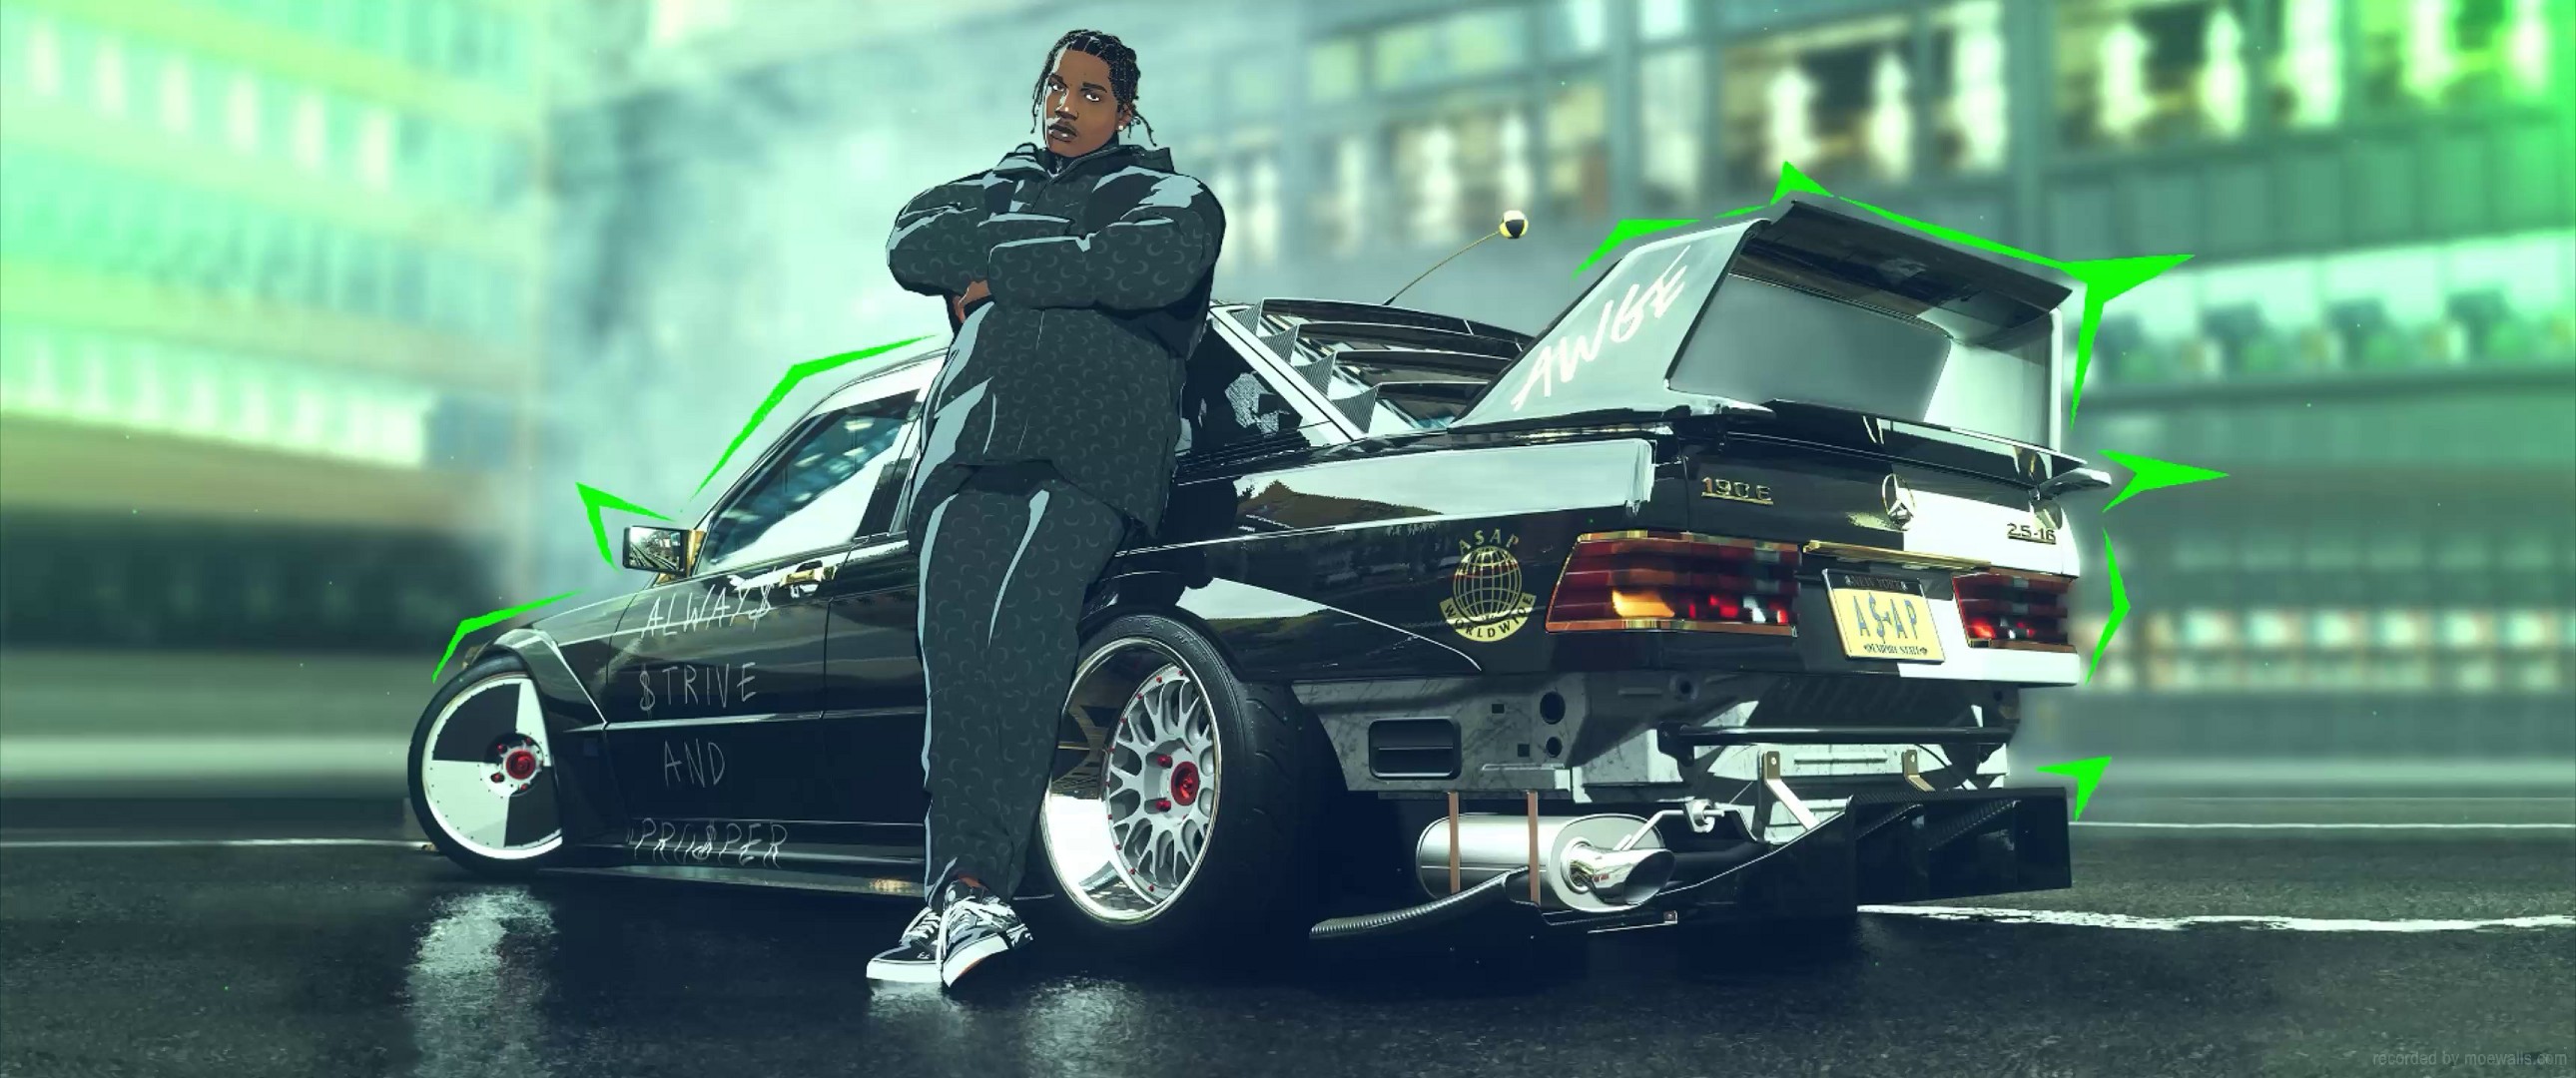 1 Need For Speed Unbound Live Wallpapers, Animated Wallpapers - MoeWalls